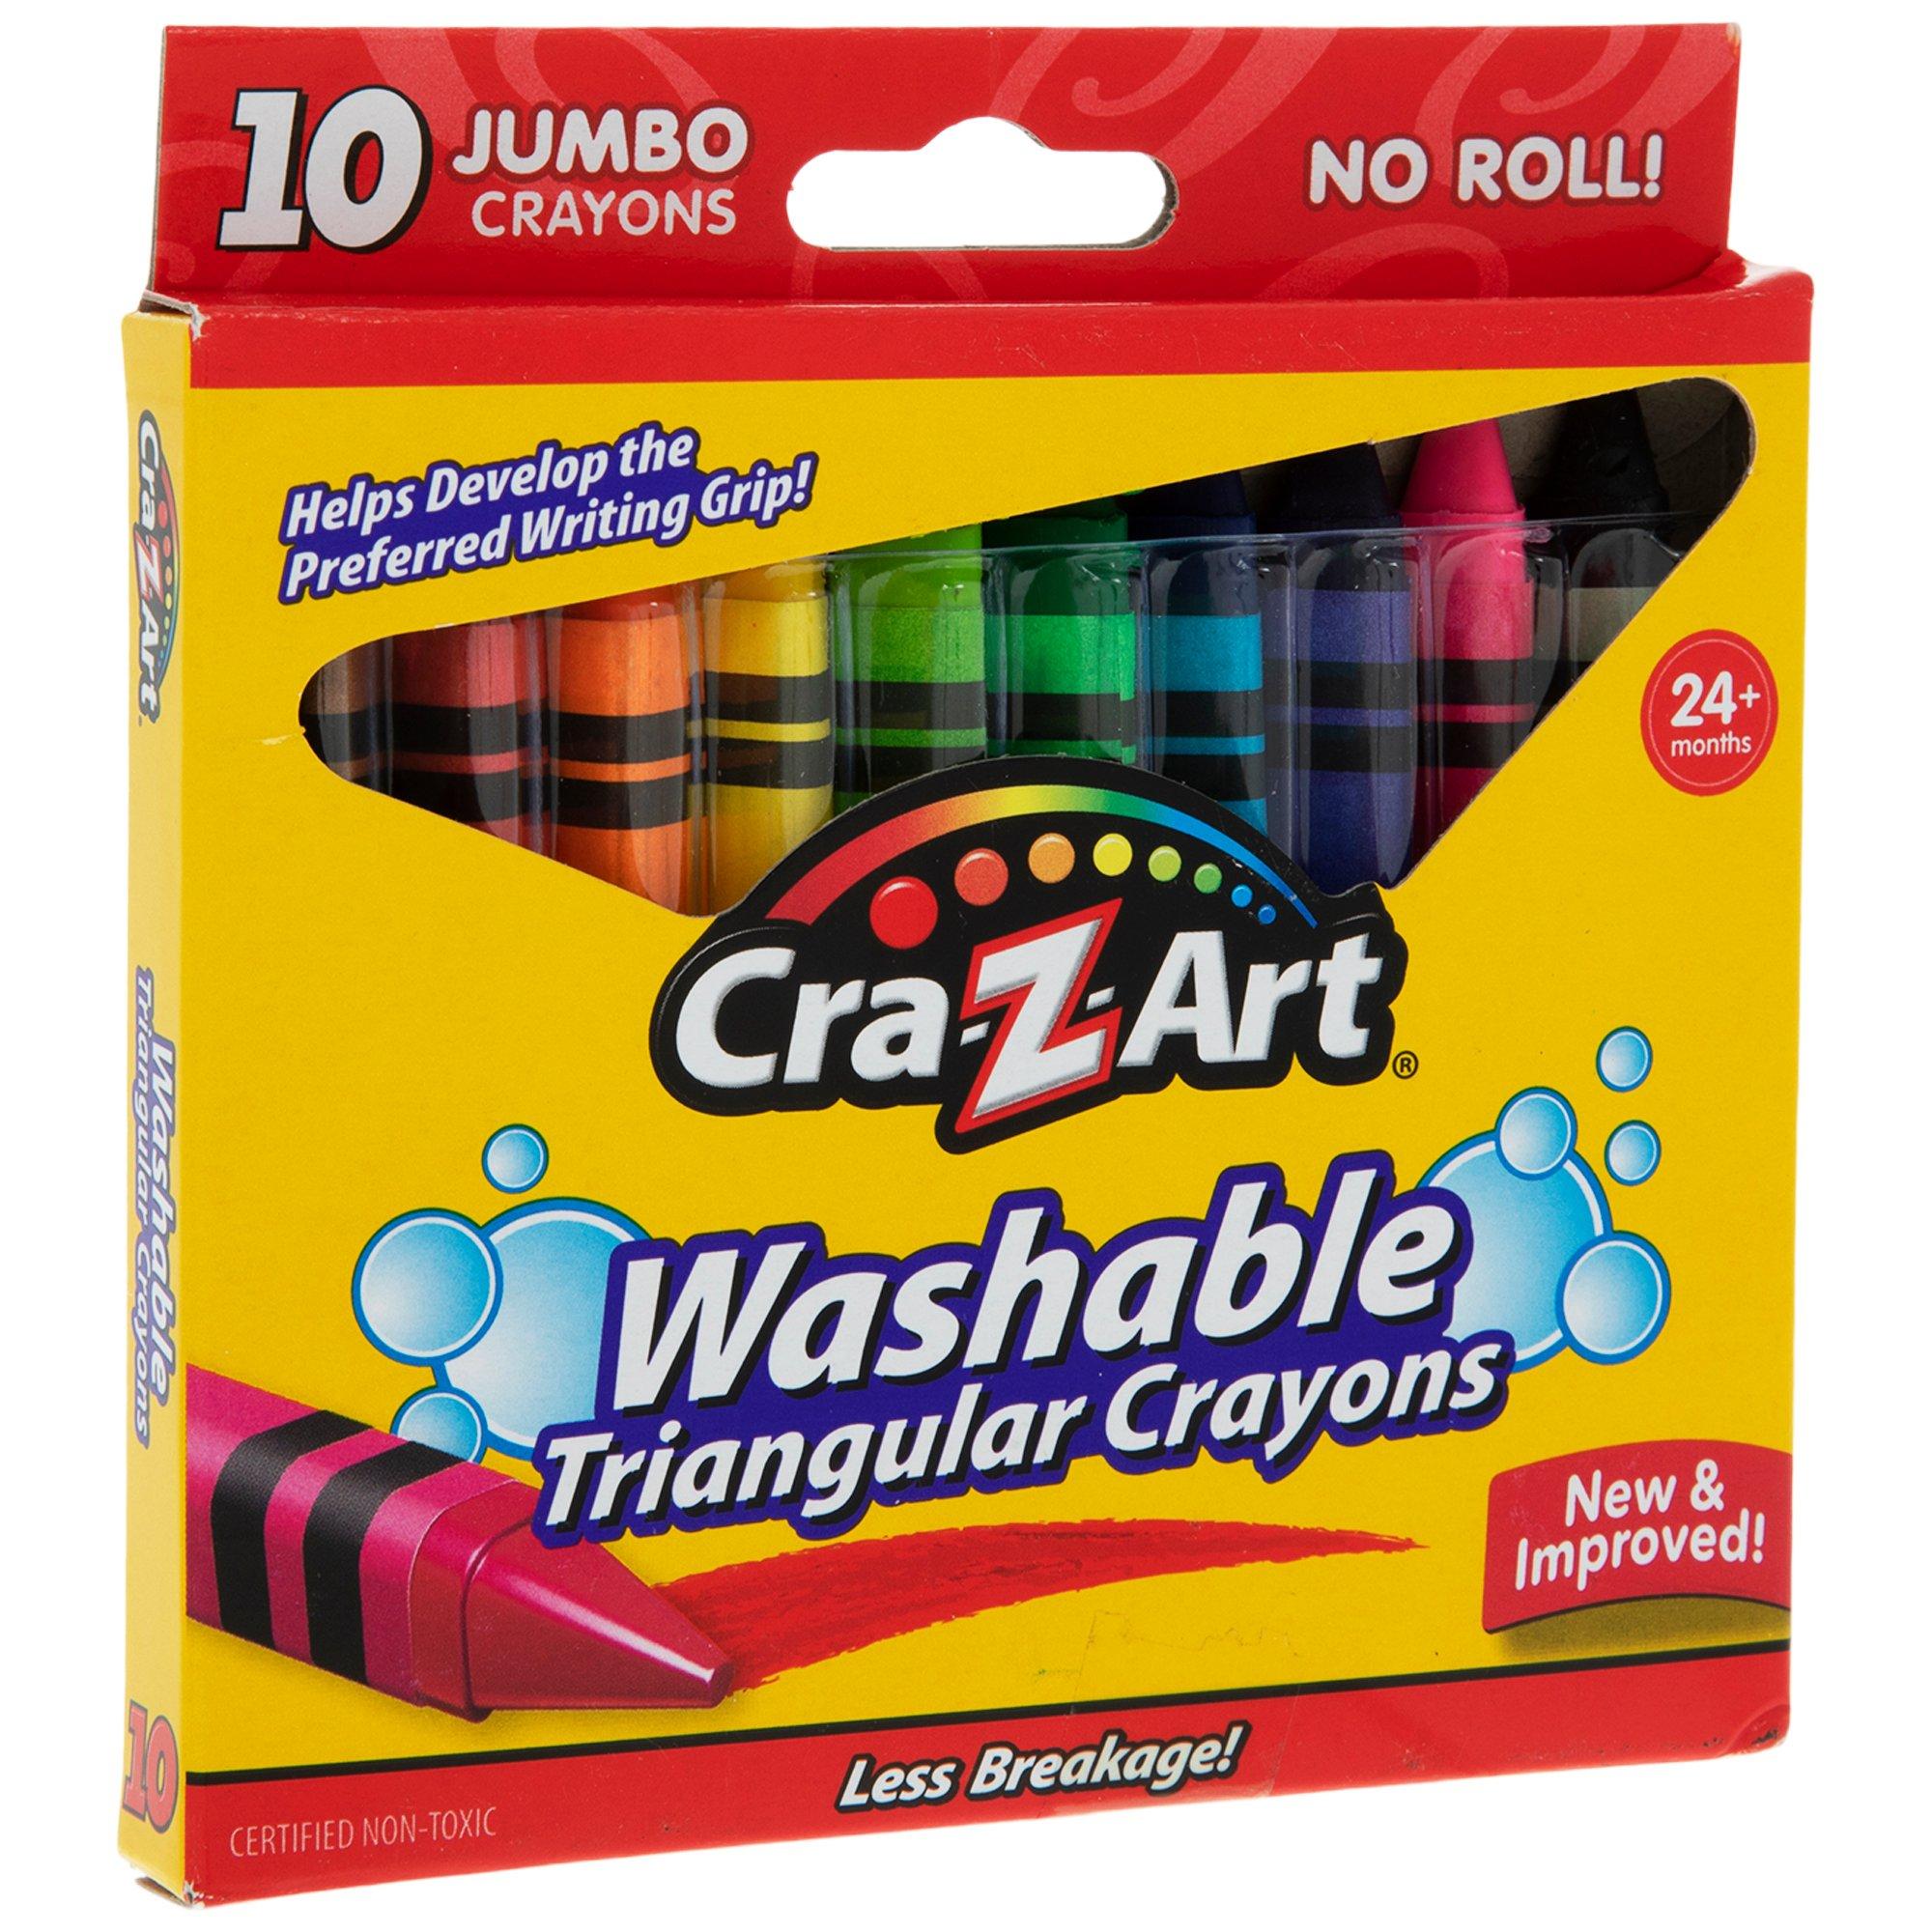 Crayola Assorted Broad Line Markers - 10 Piece Set, Hobby Lobby